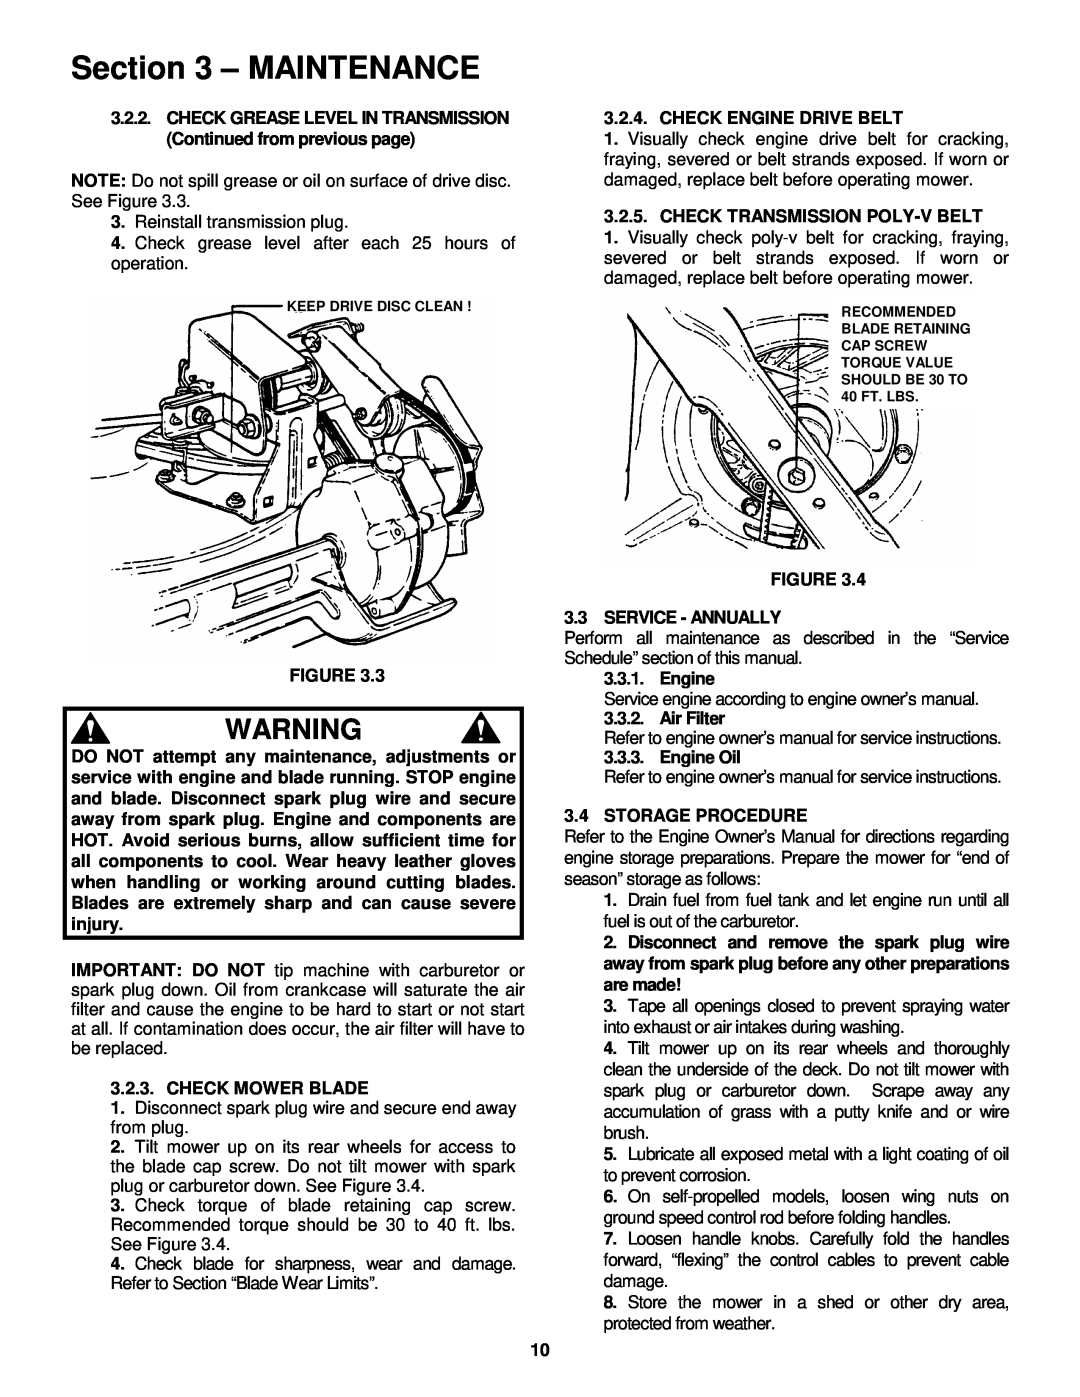 Snapper P216512BV, P216012, WP216512BV important safety instructions Maintenance, Check Mower Blade 